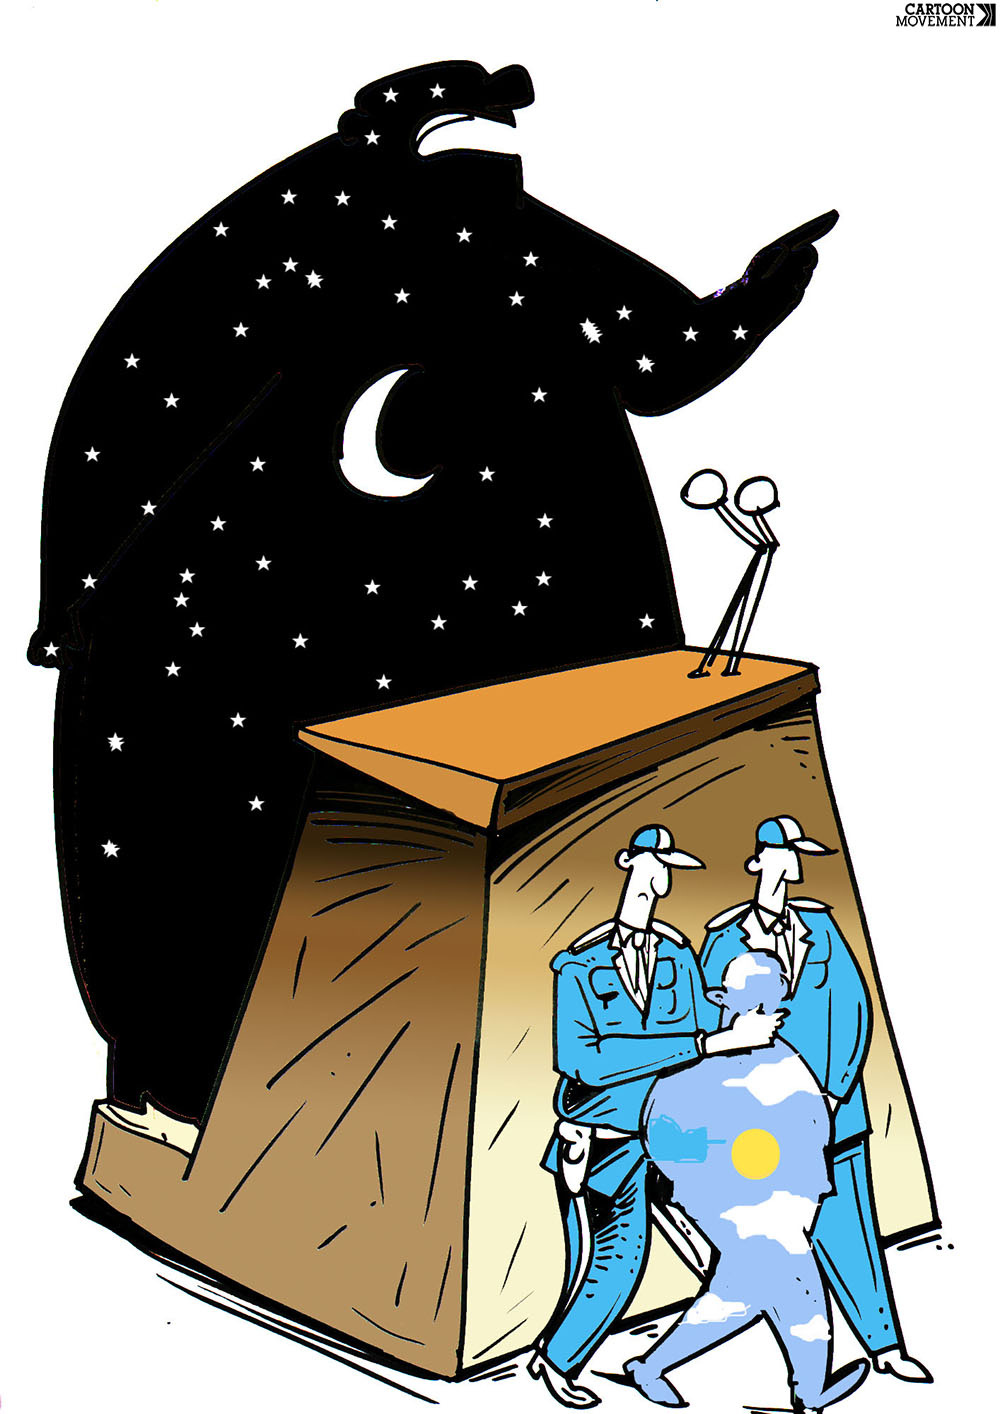 Cartoon showing a large figure holding a speech behind a lectern, while a small man is being escorted away by two police men. The large figure holding the speech is a black silhouette with stars and a moon inside, while the smaller figure that is arrested is a light blue silhouette with a sun and some clouds inside.